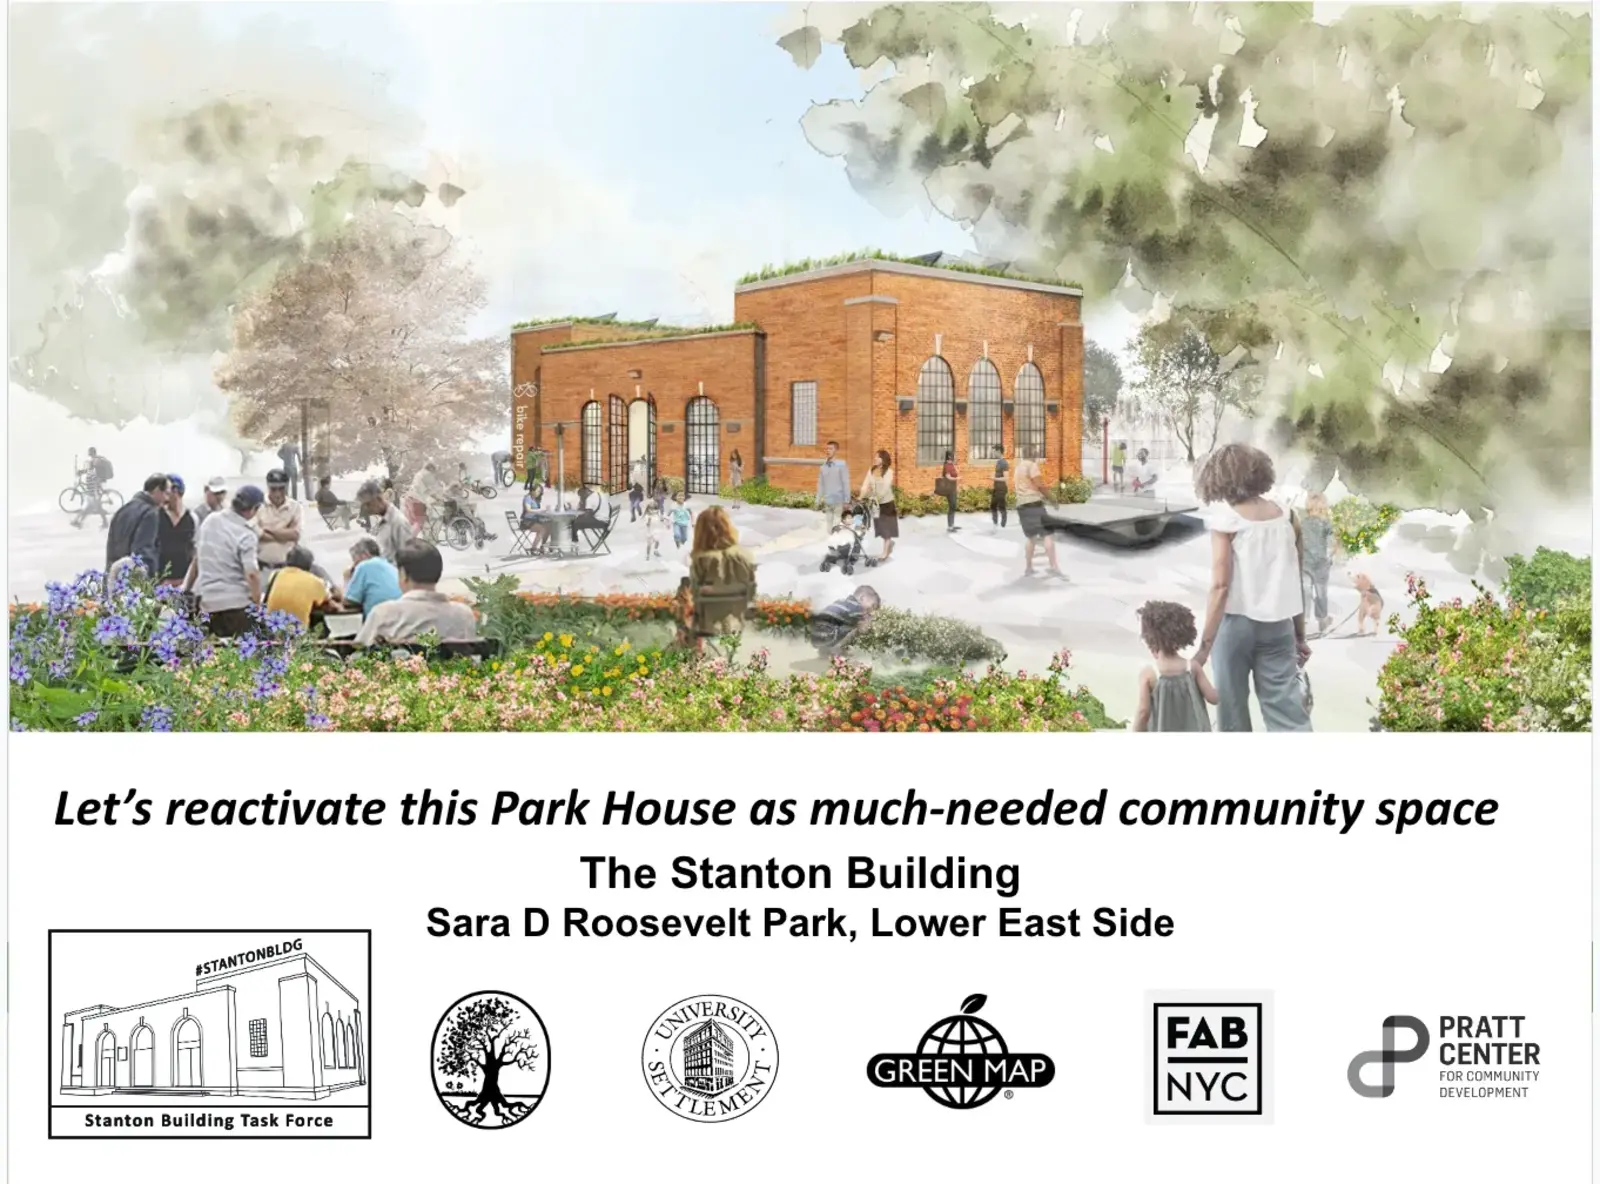 We're part of the community coalition formed to reanimate this former park recreation center